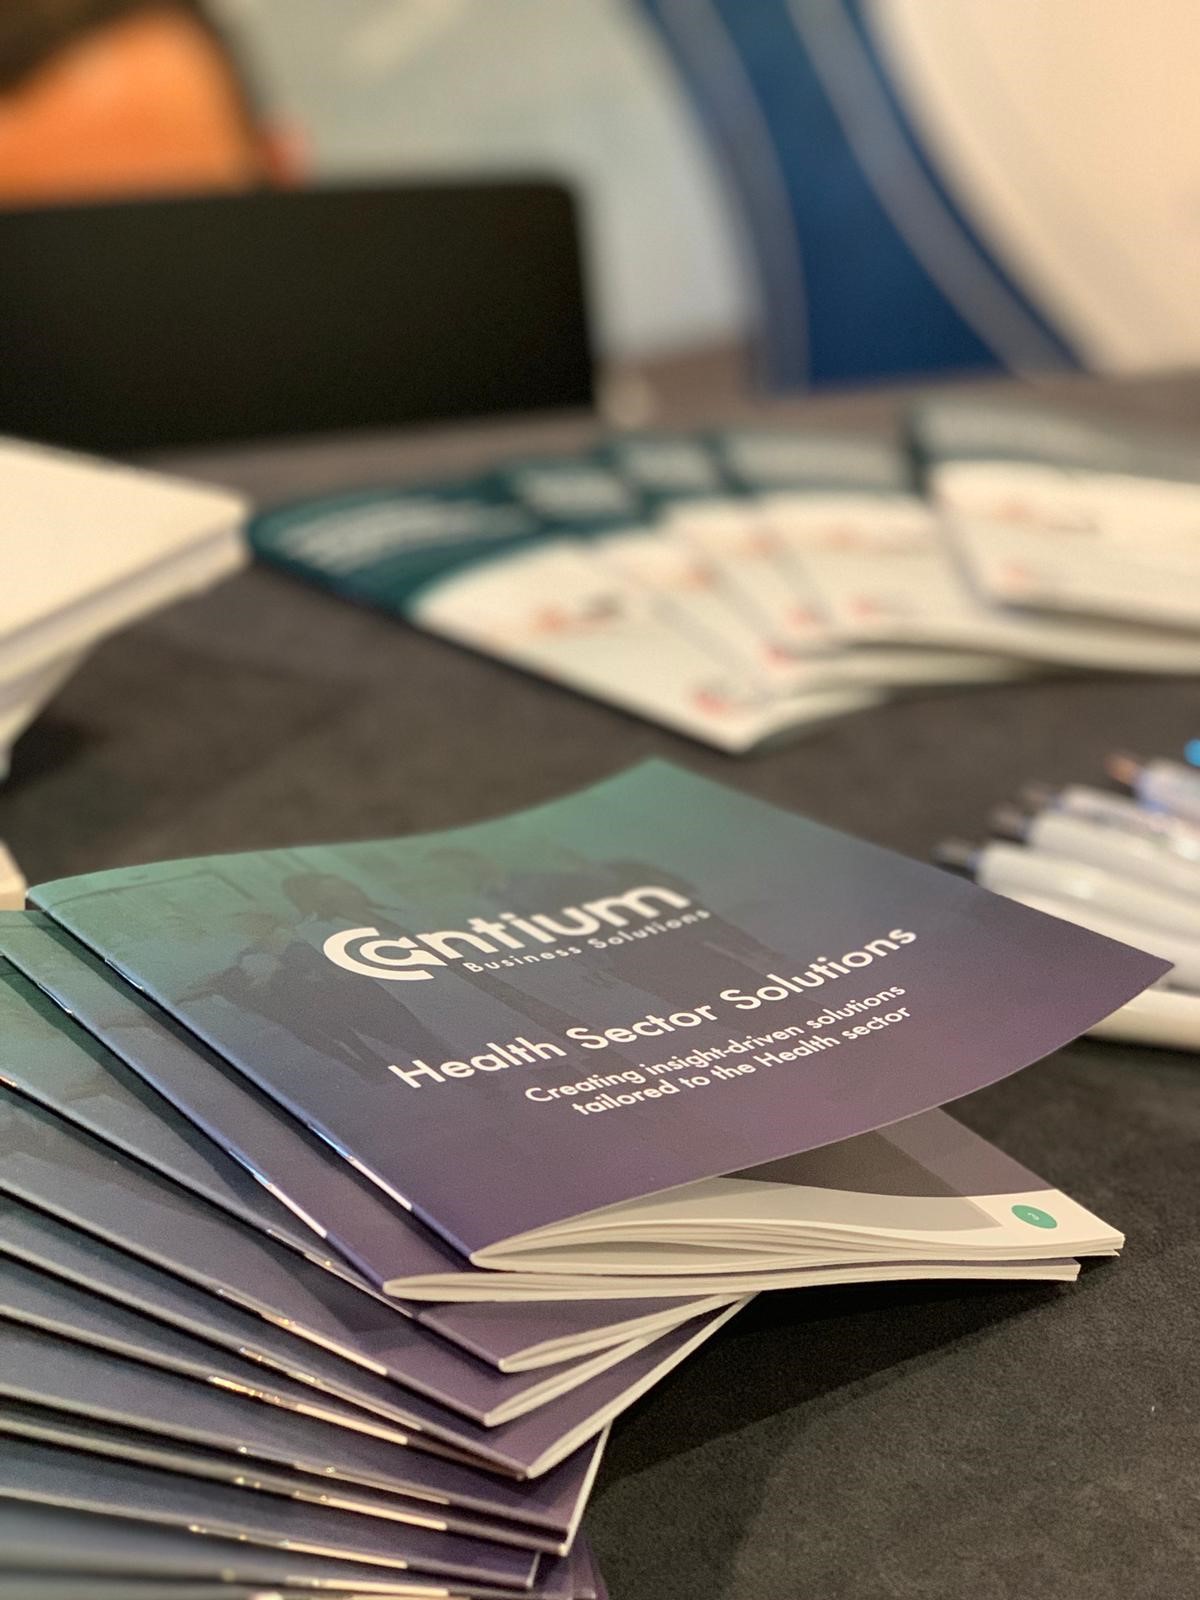 Cantium branded health sector information leaflets on a table